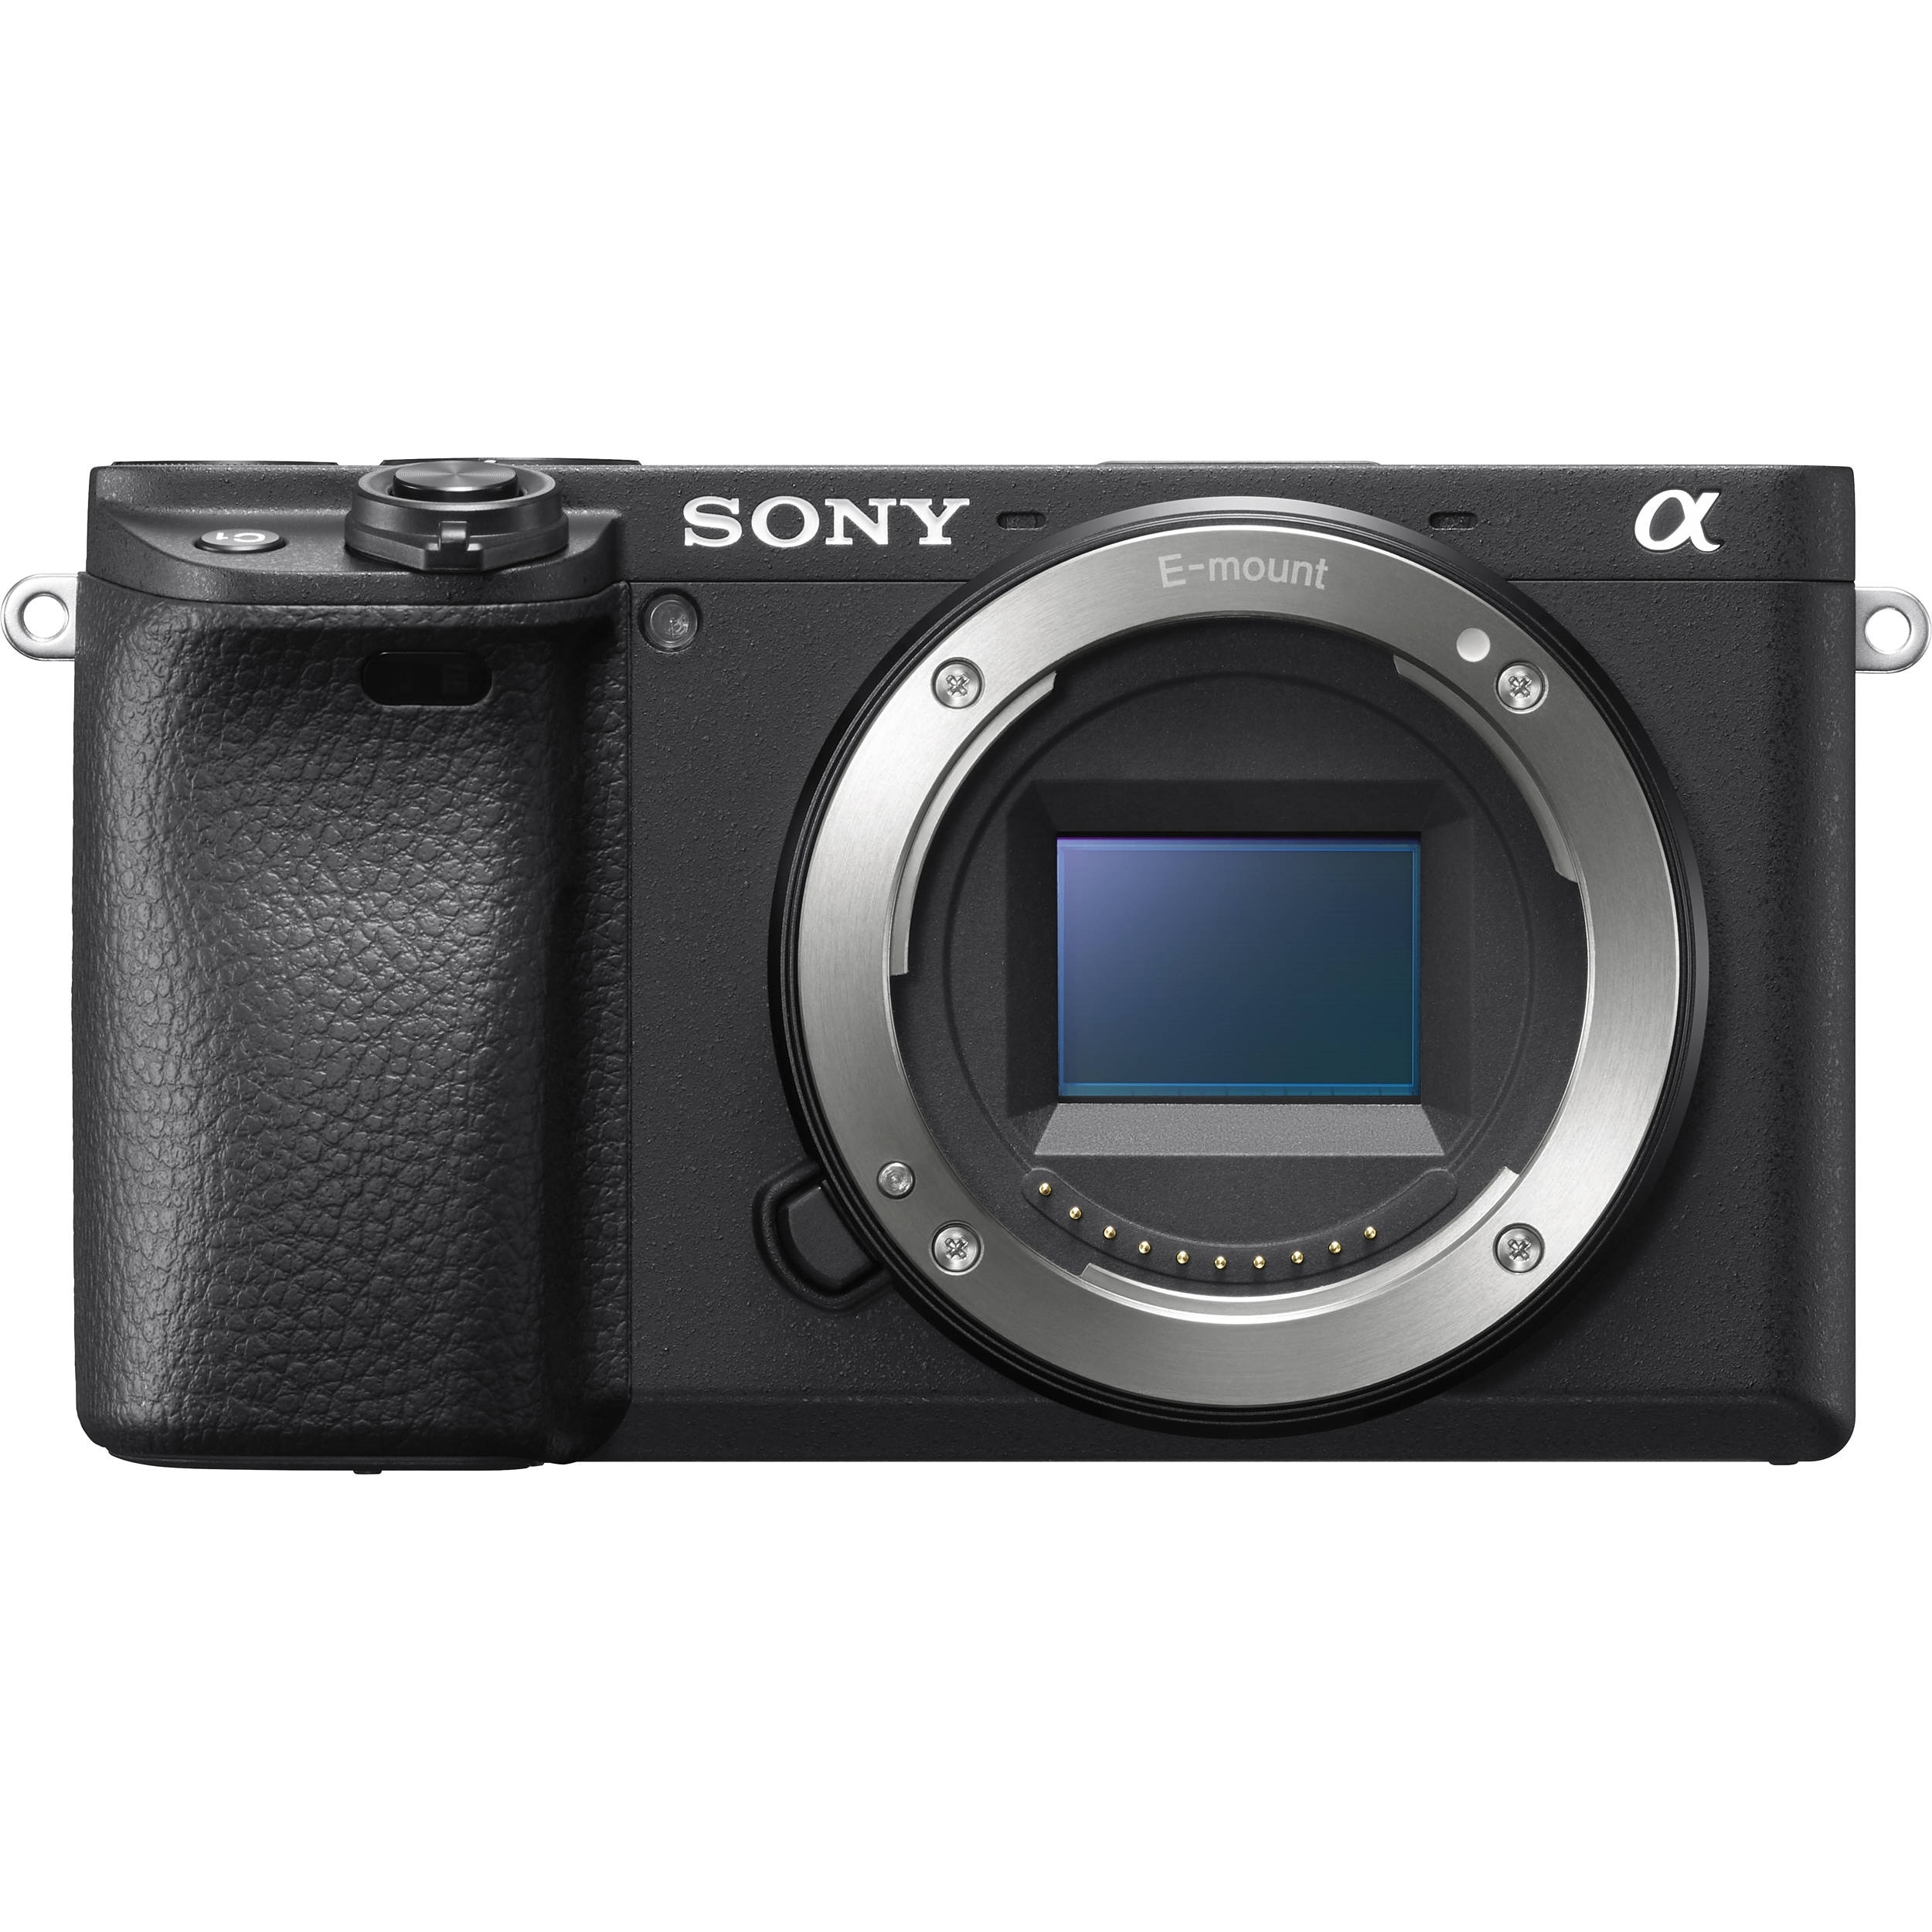 Sony Alpha 1 Review for Photographers – My Personal Take